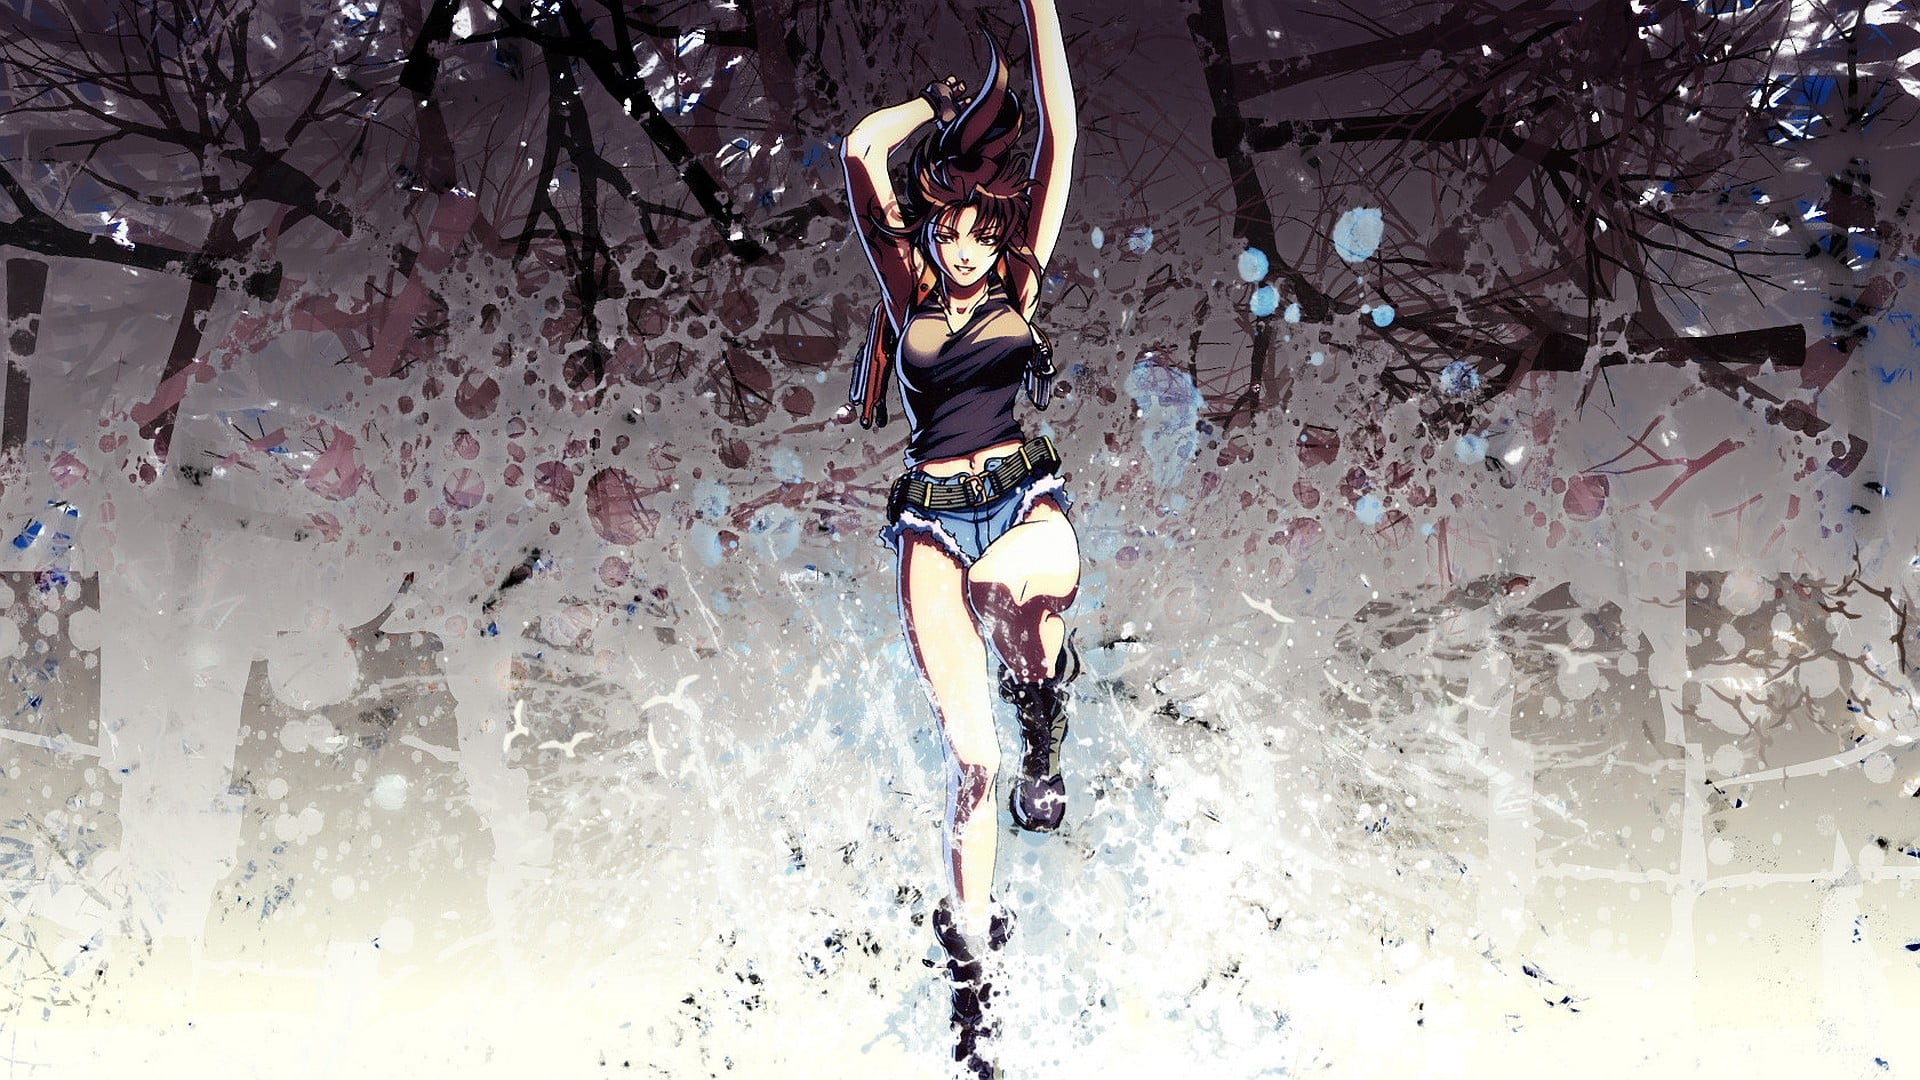 anime, Black Lagoon, Revy, sport, one person, leisure activity